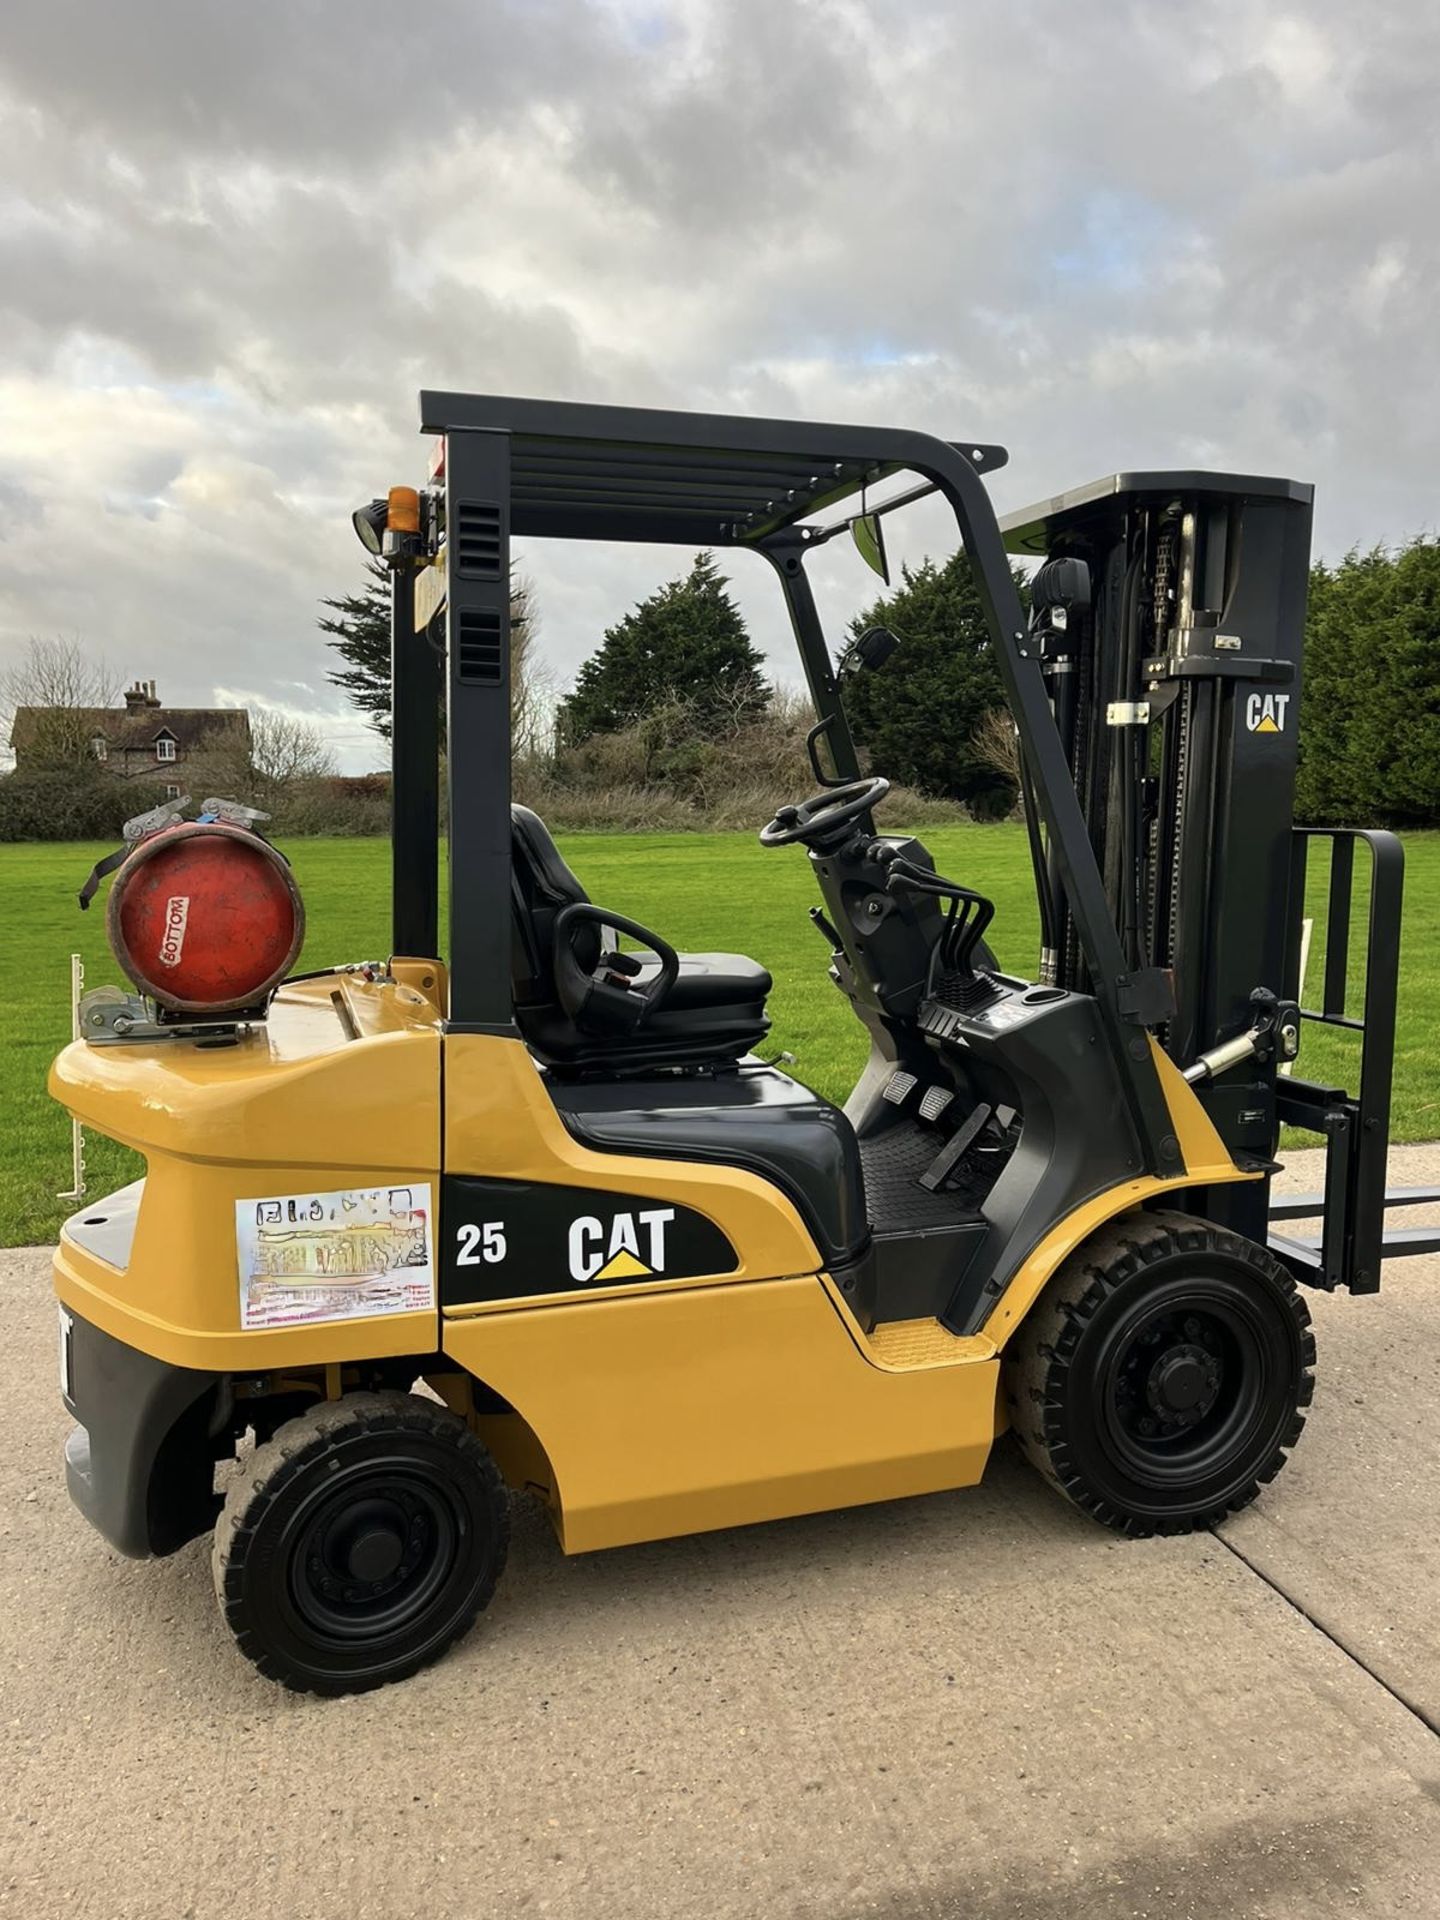 2017, CATERPILLAR 2.5 Tonne Gas Forklift (Container) Triple Mast - Image 3 of 10